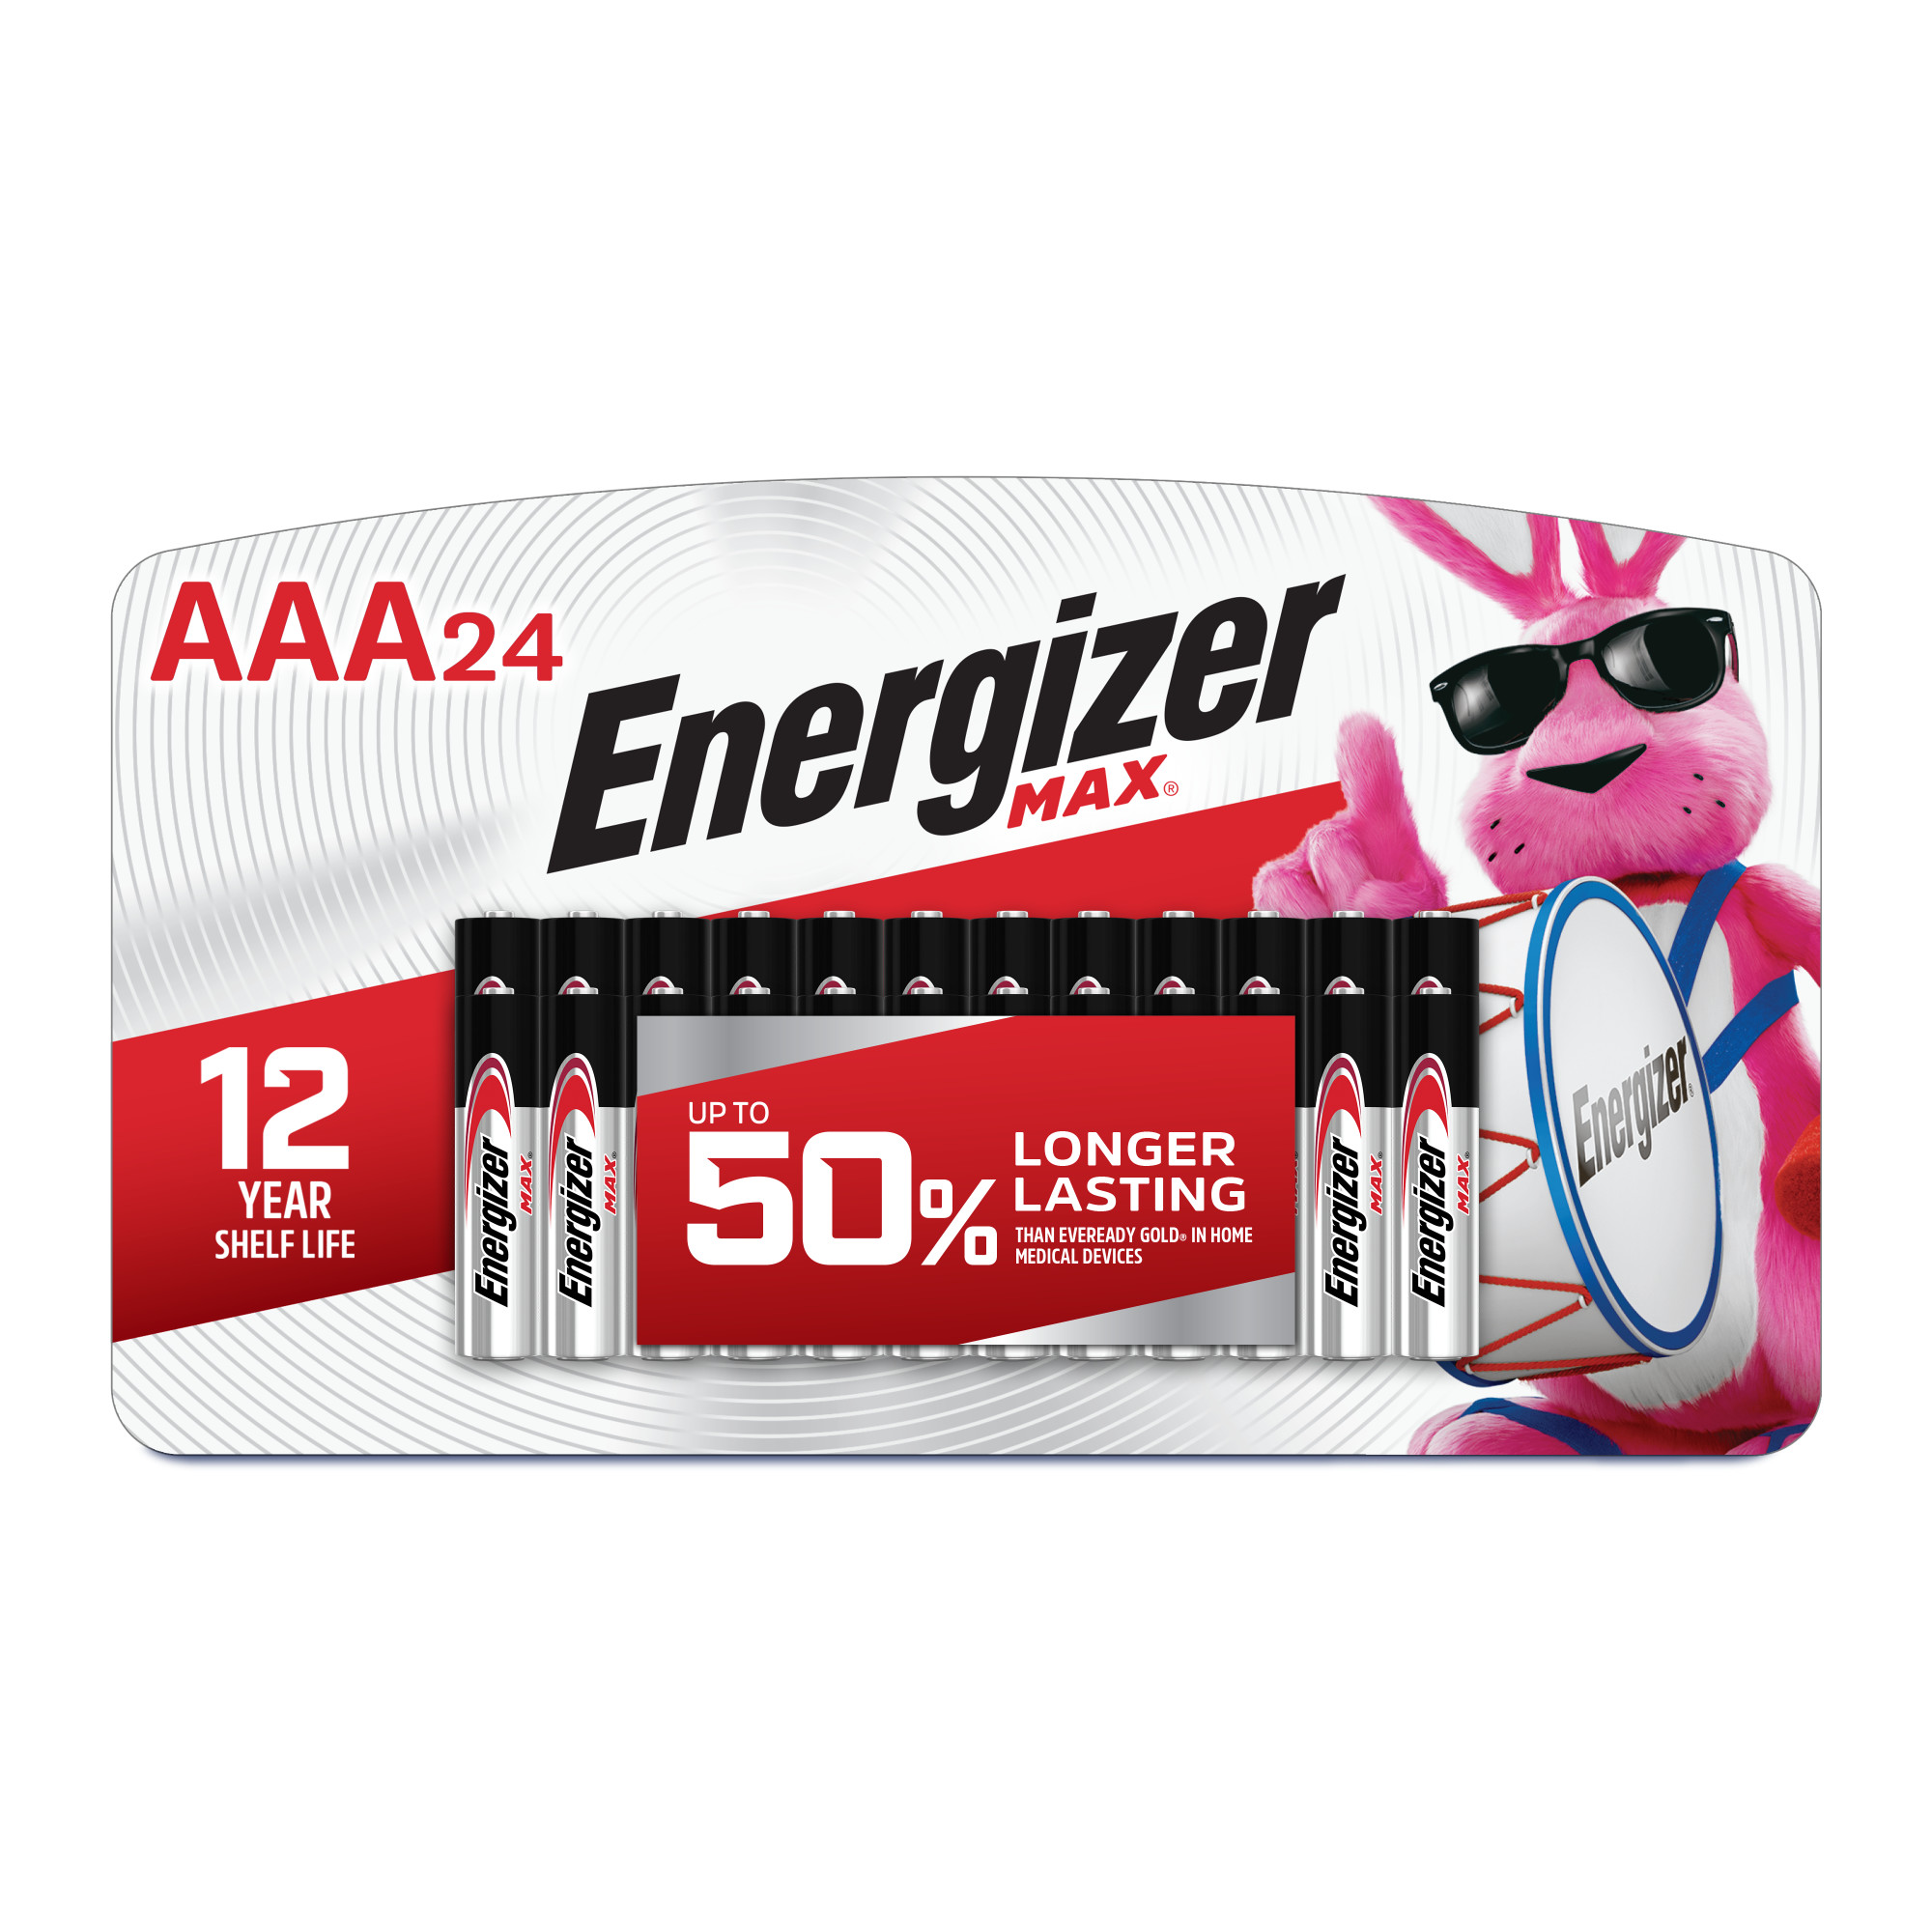 Energizer MAX AAA Batteries (24 Pack), Triple A Alkaline Batteries - image 1 of 14